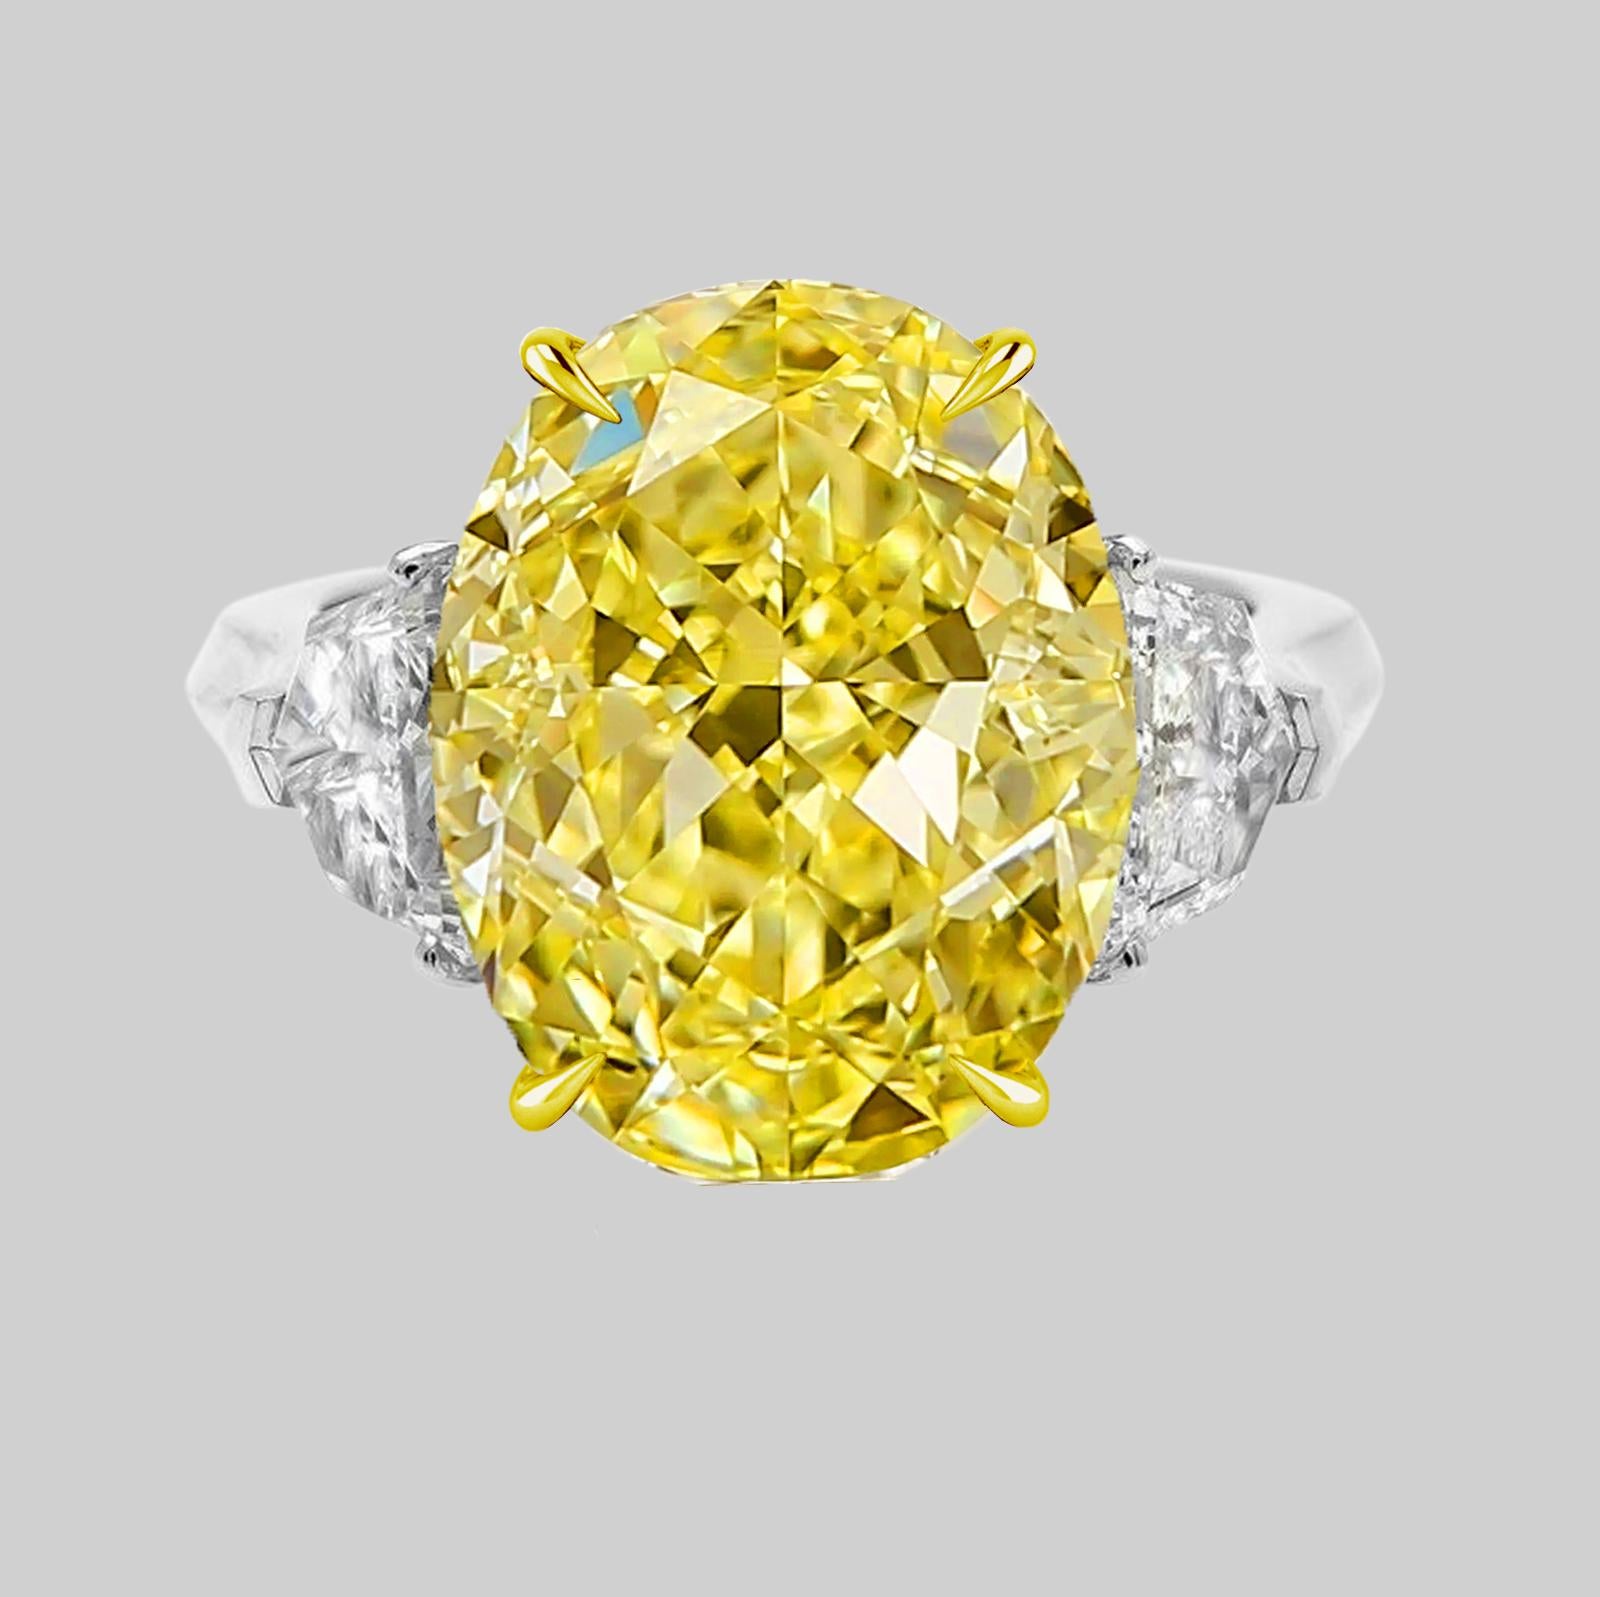 Contemporary GIA Certified 7.08 Carat Fancy Yellow Oval Diamond Ring For Sale